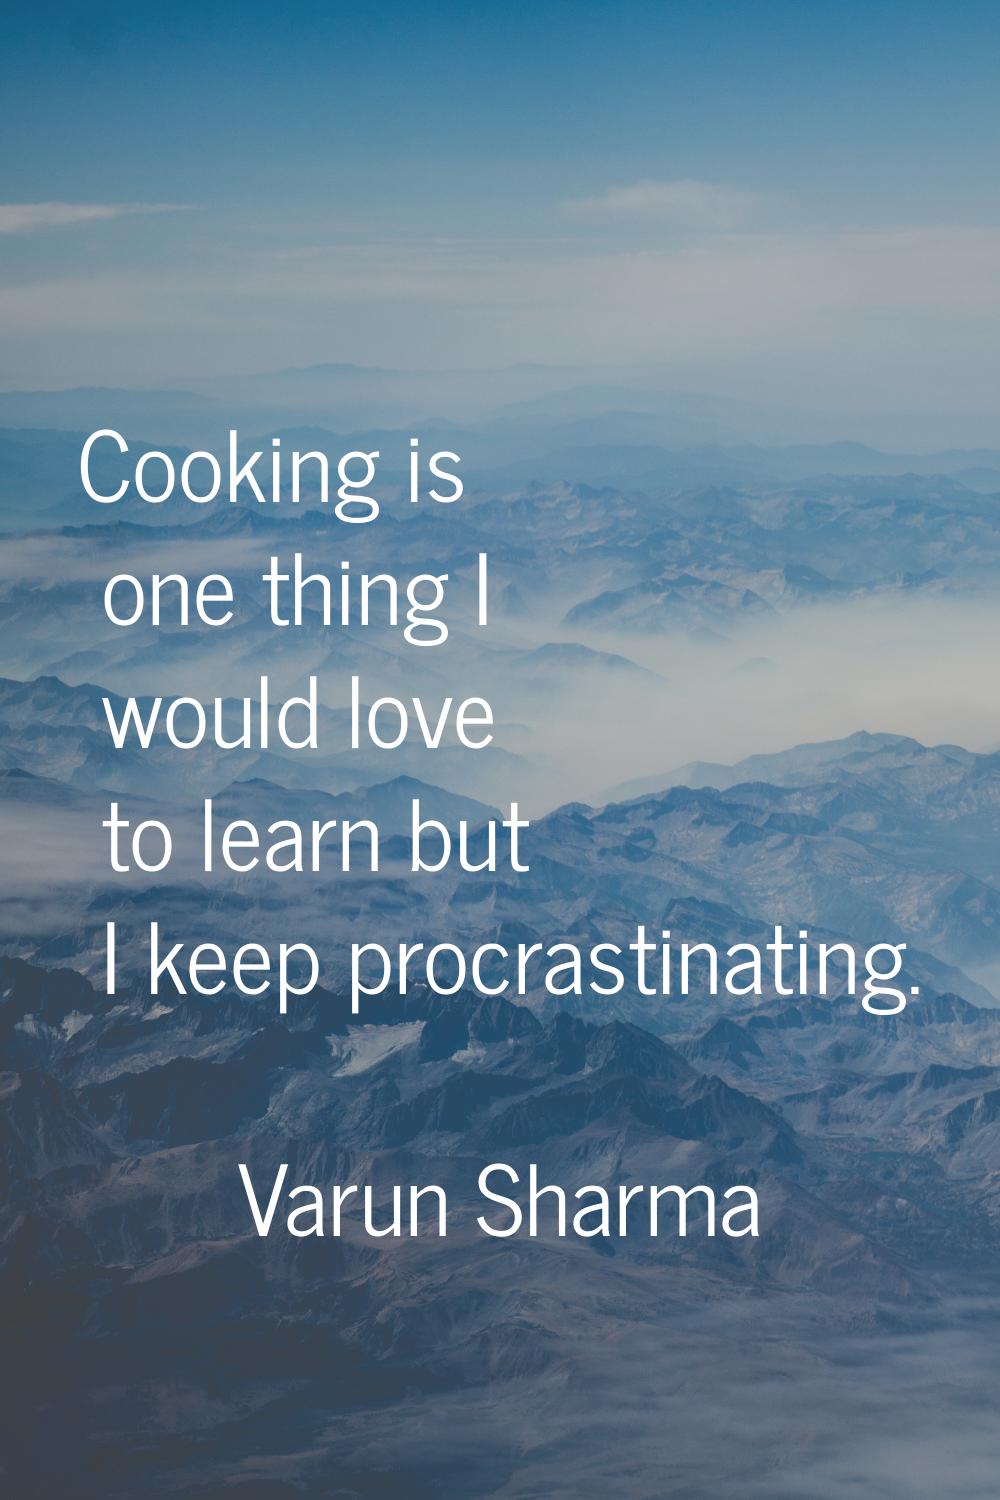 Cooking is one thing I would love to learn but I keep procrastinating.